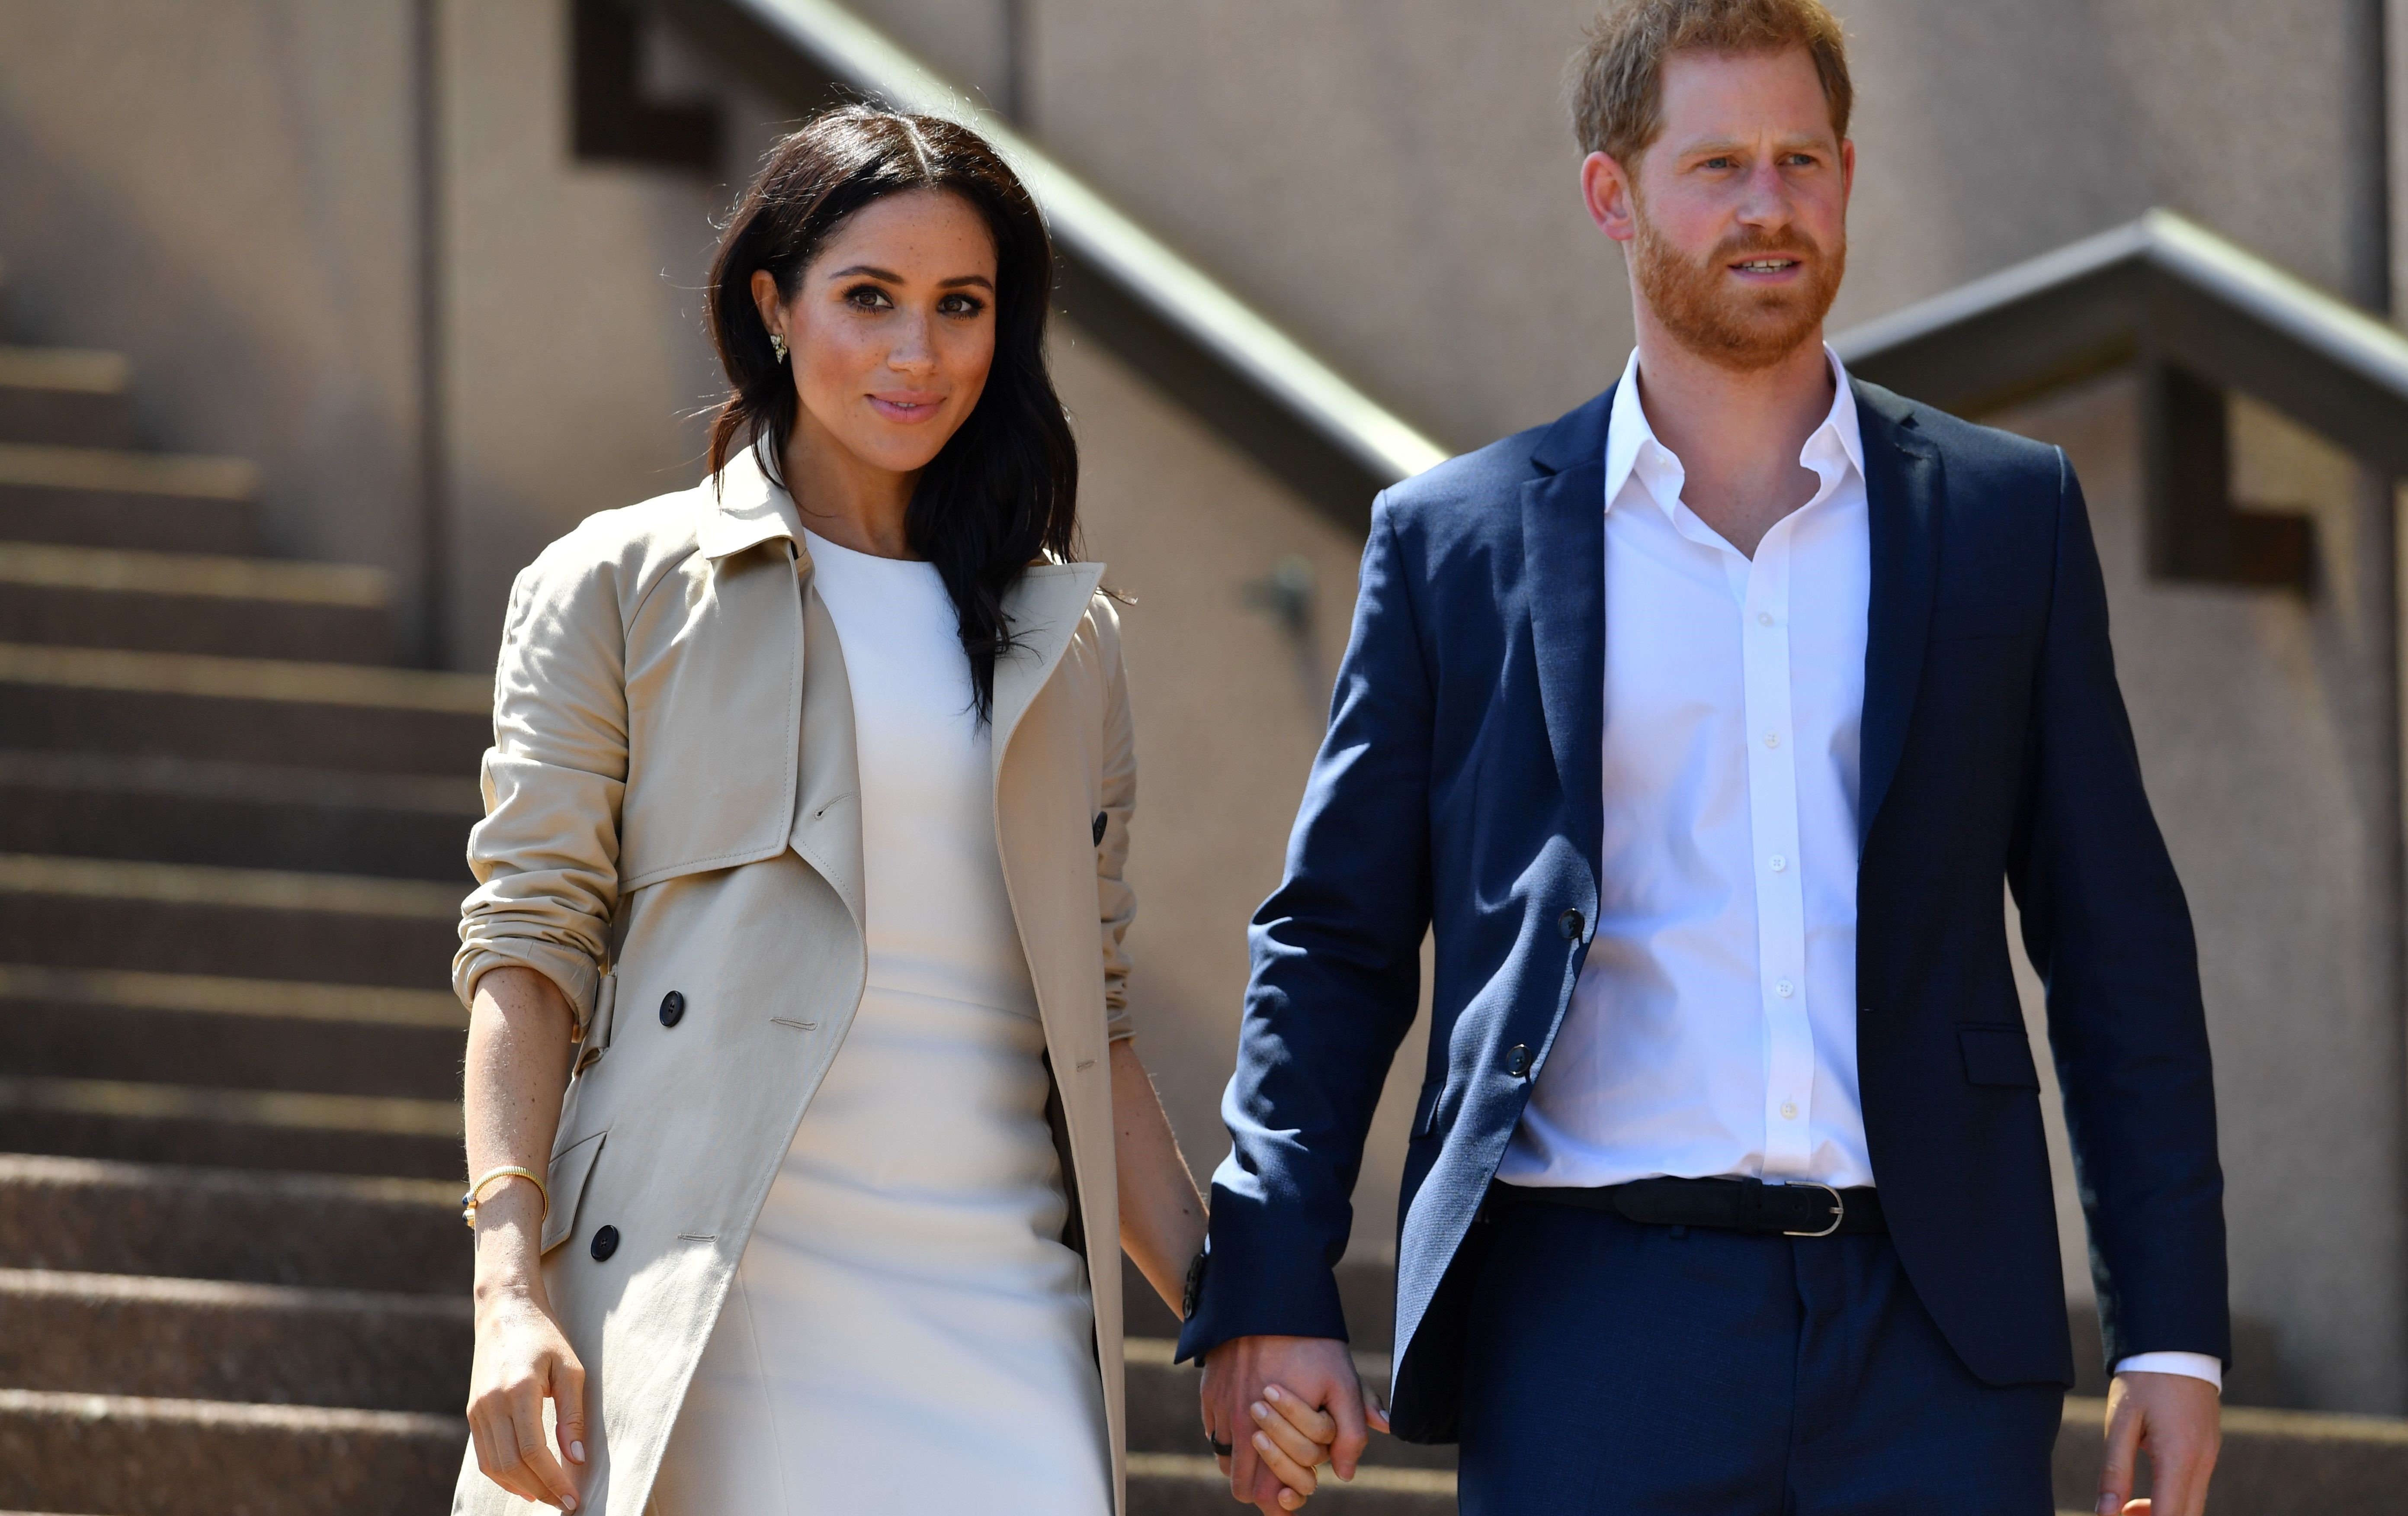 Prince Harry and Meghan Markle walk down the stairs of Sydney's Opera House to meet people